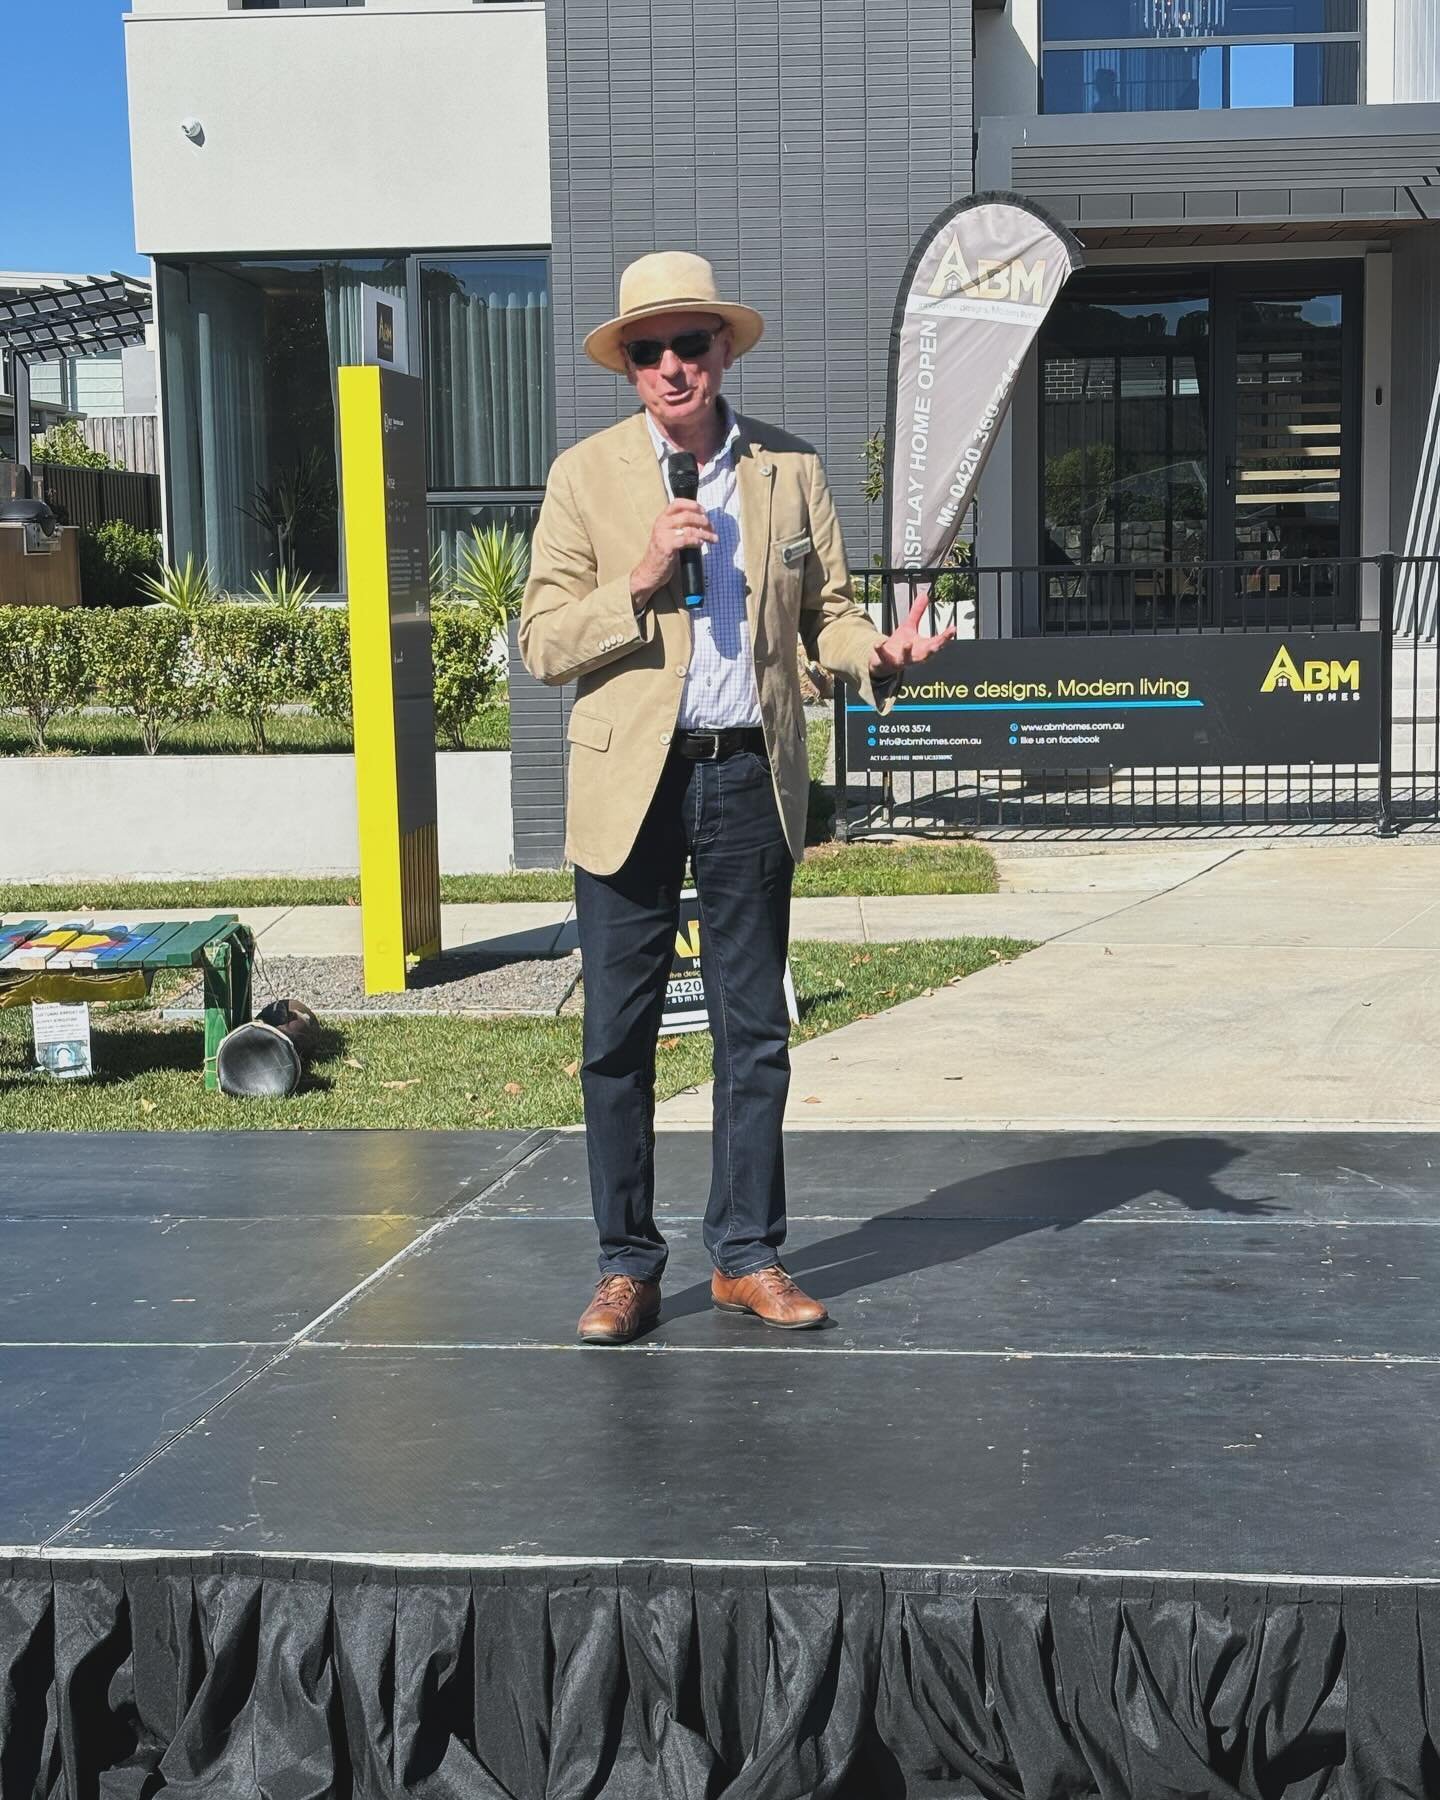 Well done again to Charles Koker and team from Celebration of African Australians in the ACT for organising an African Arts and Cultural Showcase in Whitlam last Saturday on Sierra Leone Independence Day. It was a delight again to watch and listen to